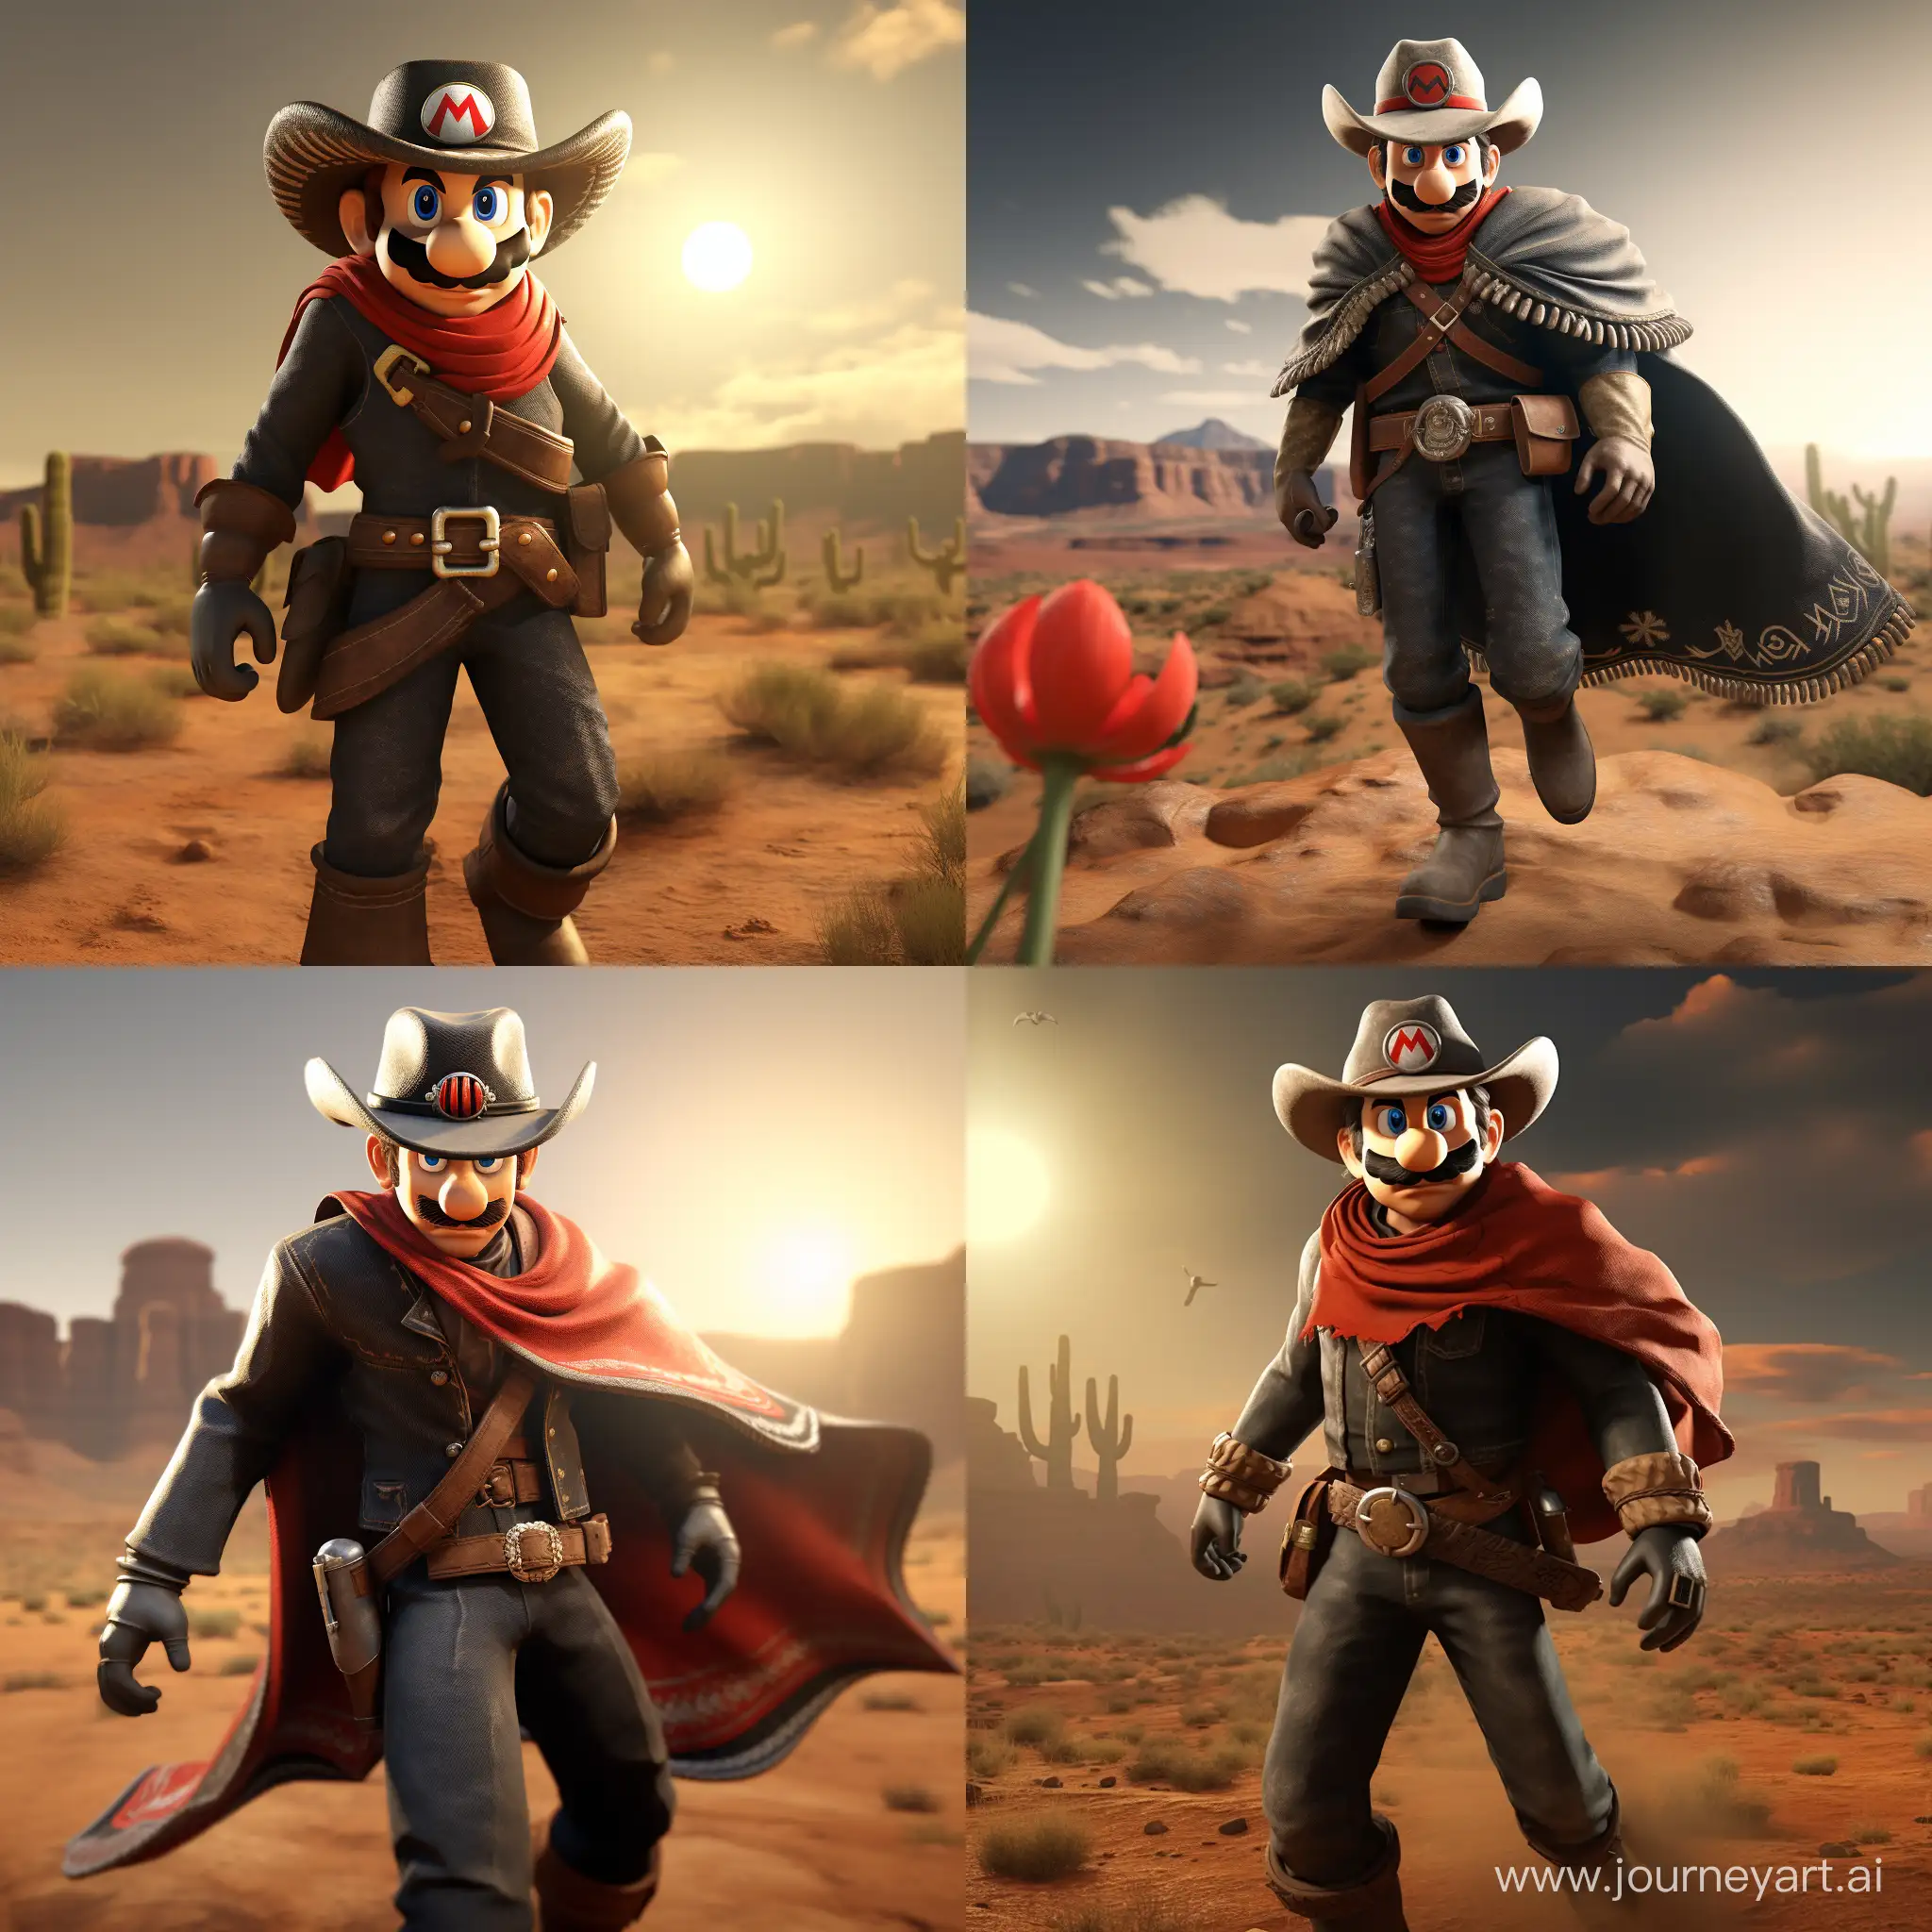 Super Mario dressed as a cowboy from Red Dead Redemption, Mario has a pancho, a cowboy hat, boots, cowboy look, wild west, black coat, boots, motion picture shot